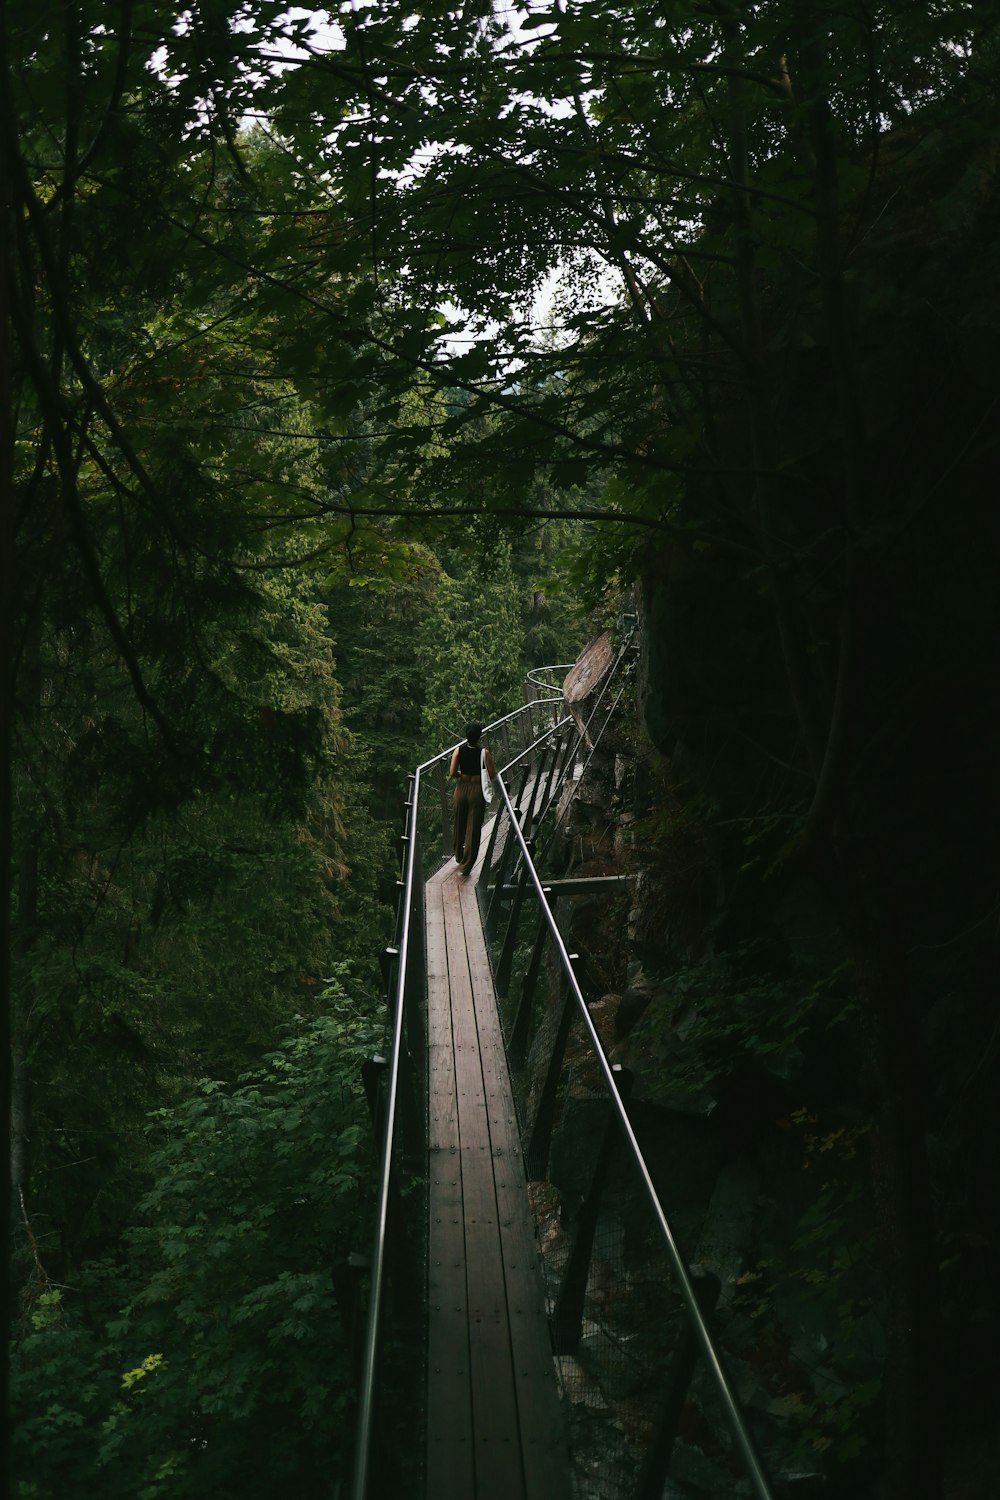 gray hanging bridge surrounded by green trees during daytime